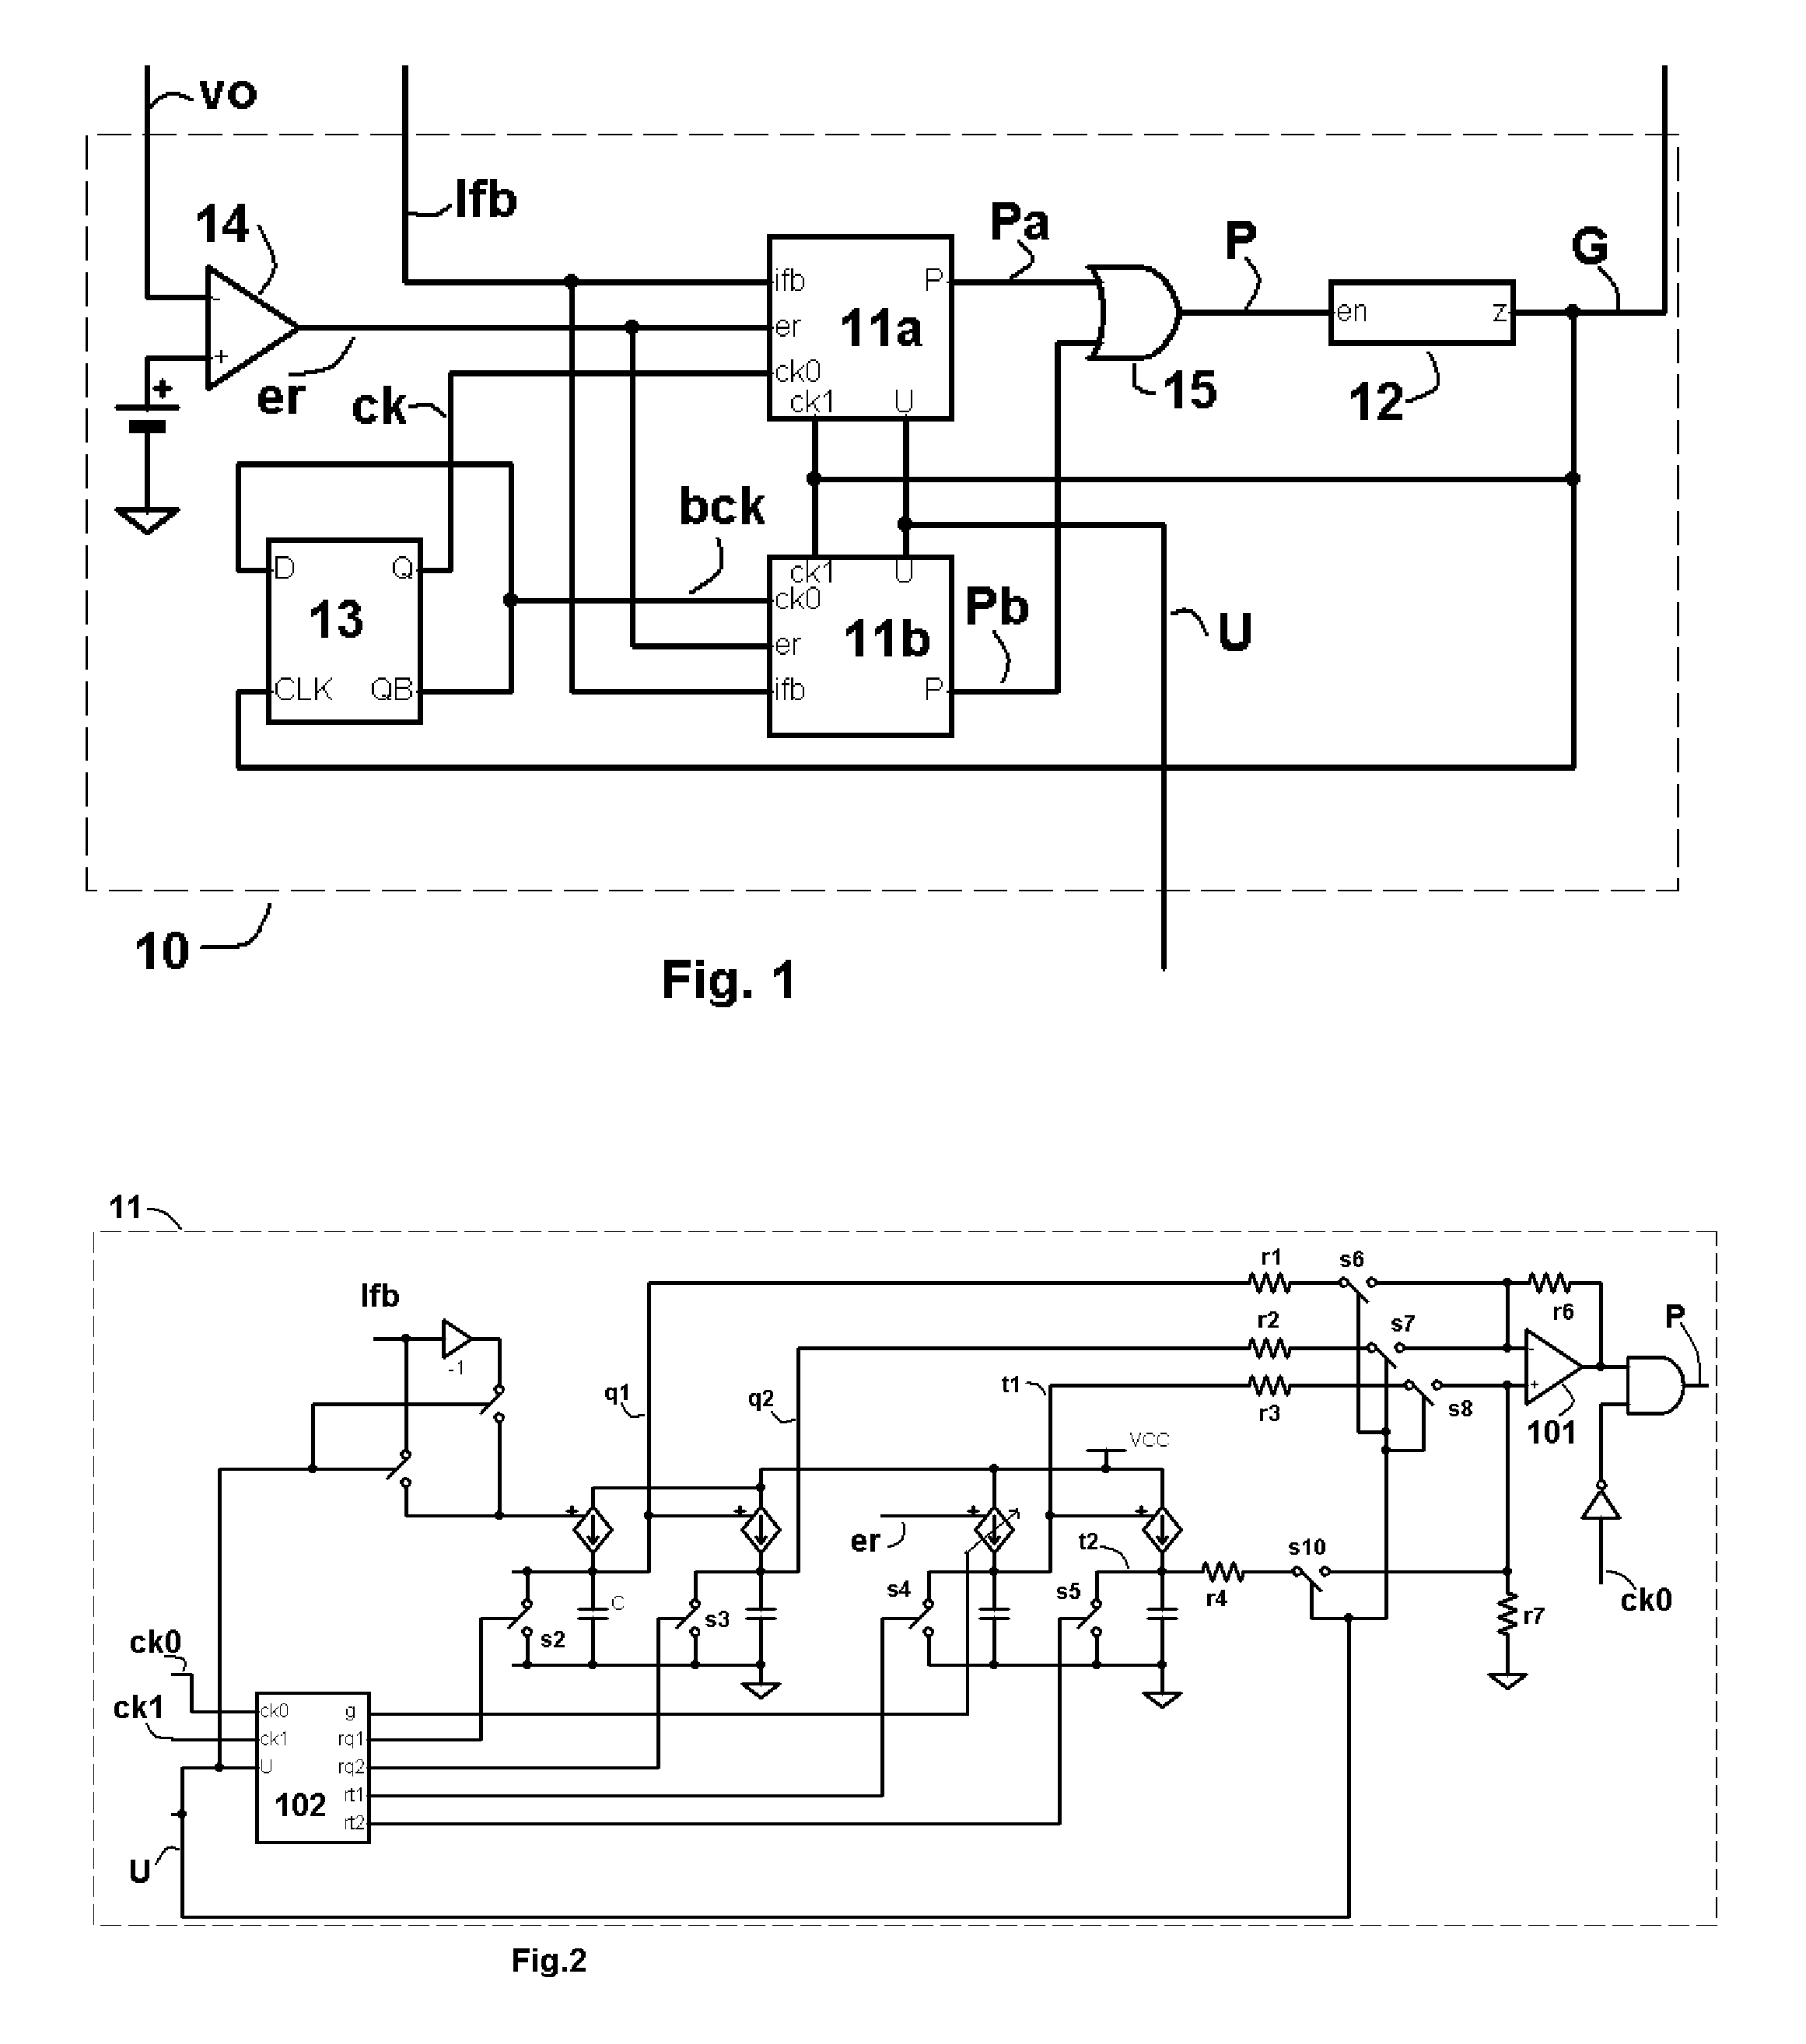 Method and apparatus for active power factor correction without sensing the line voltage